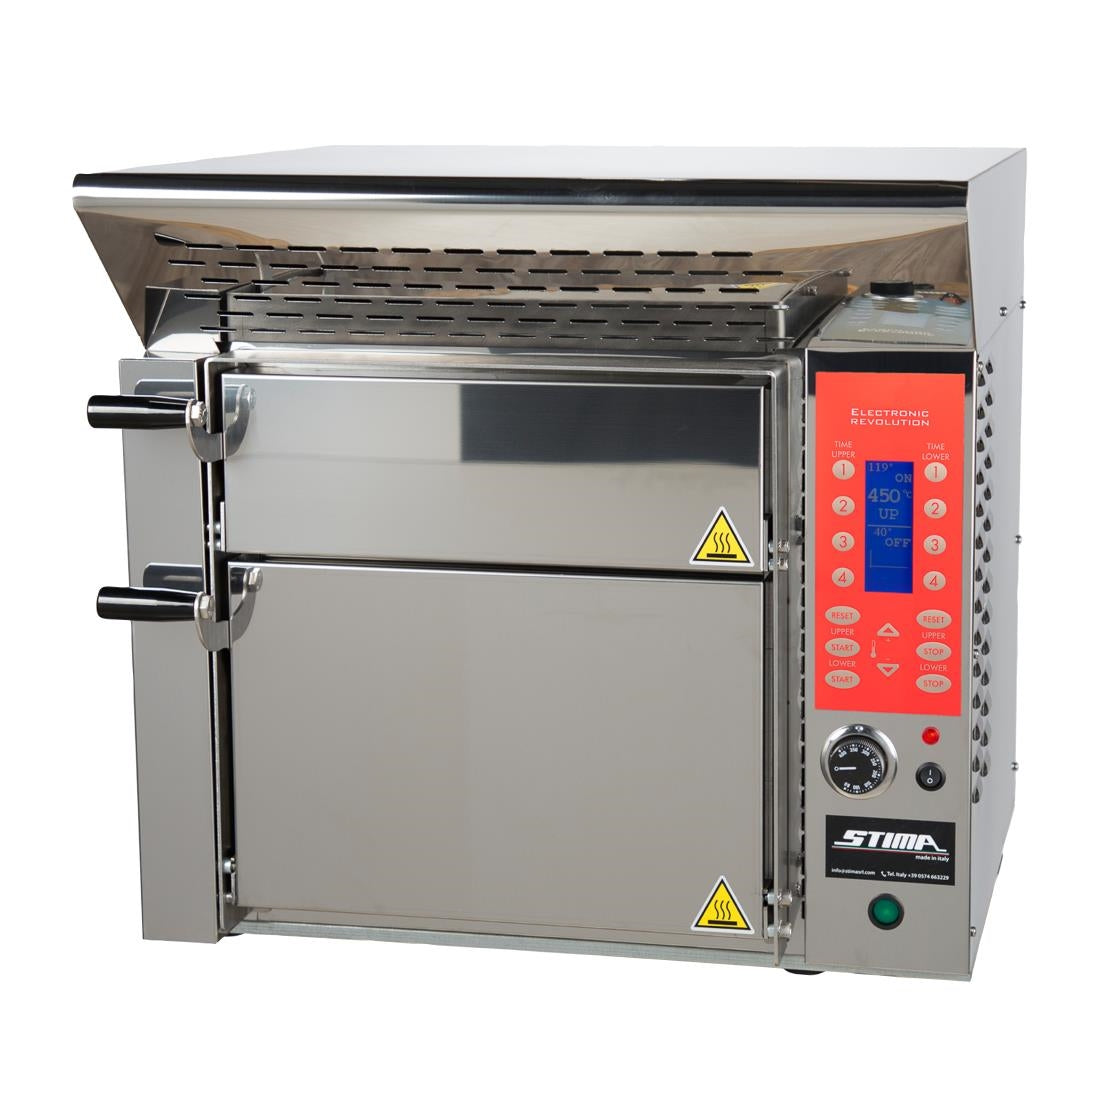 CU077 Stima VP3 Fast Cook Pizza Oven JD Catering Equipment Solutions Ltd